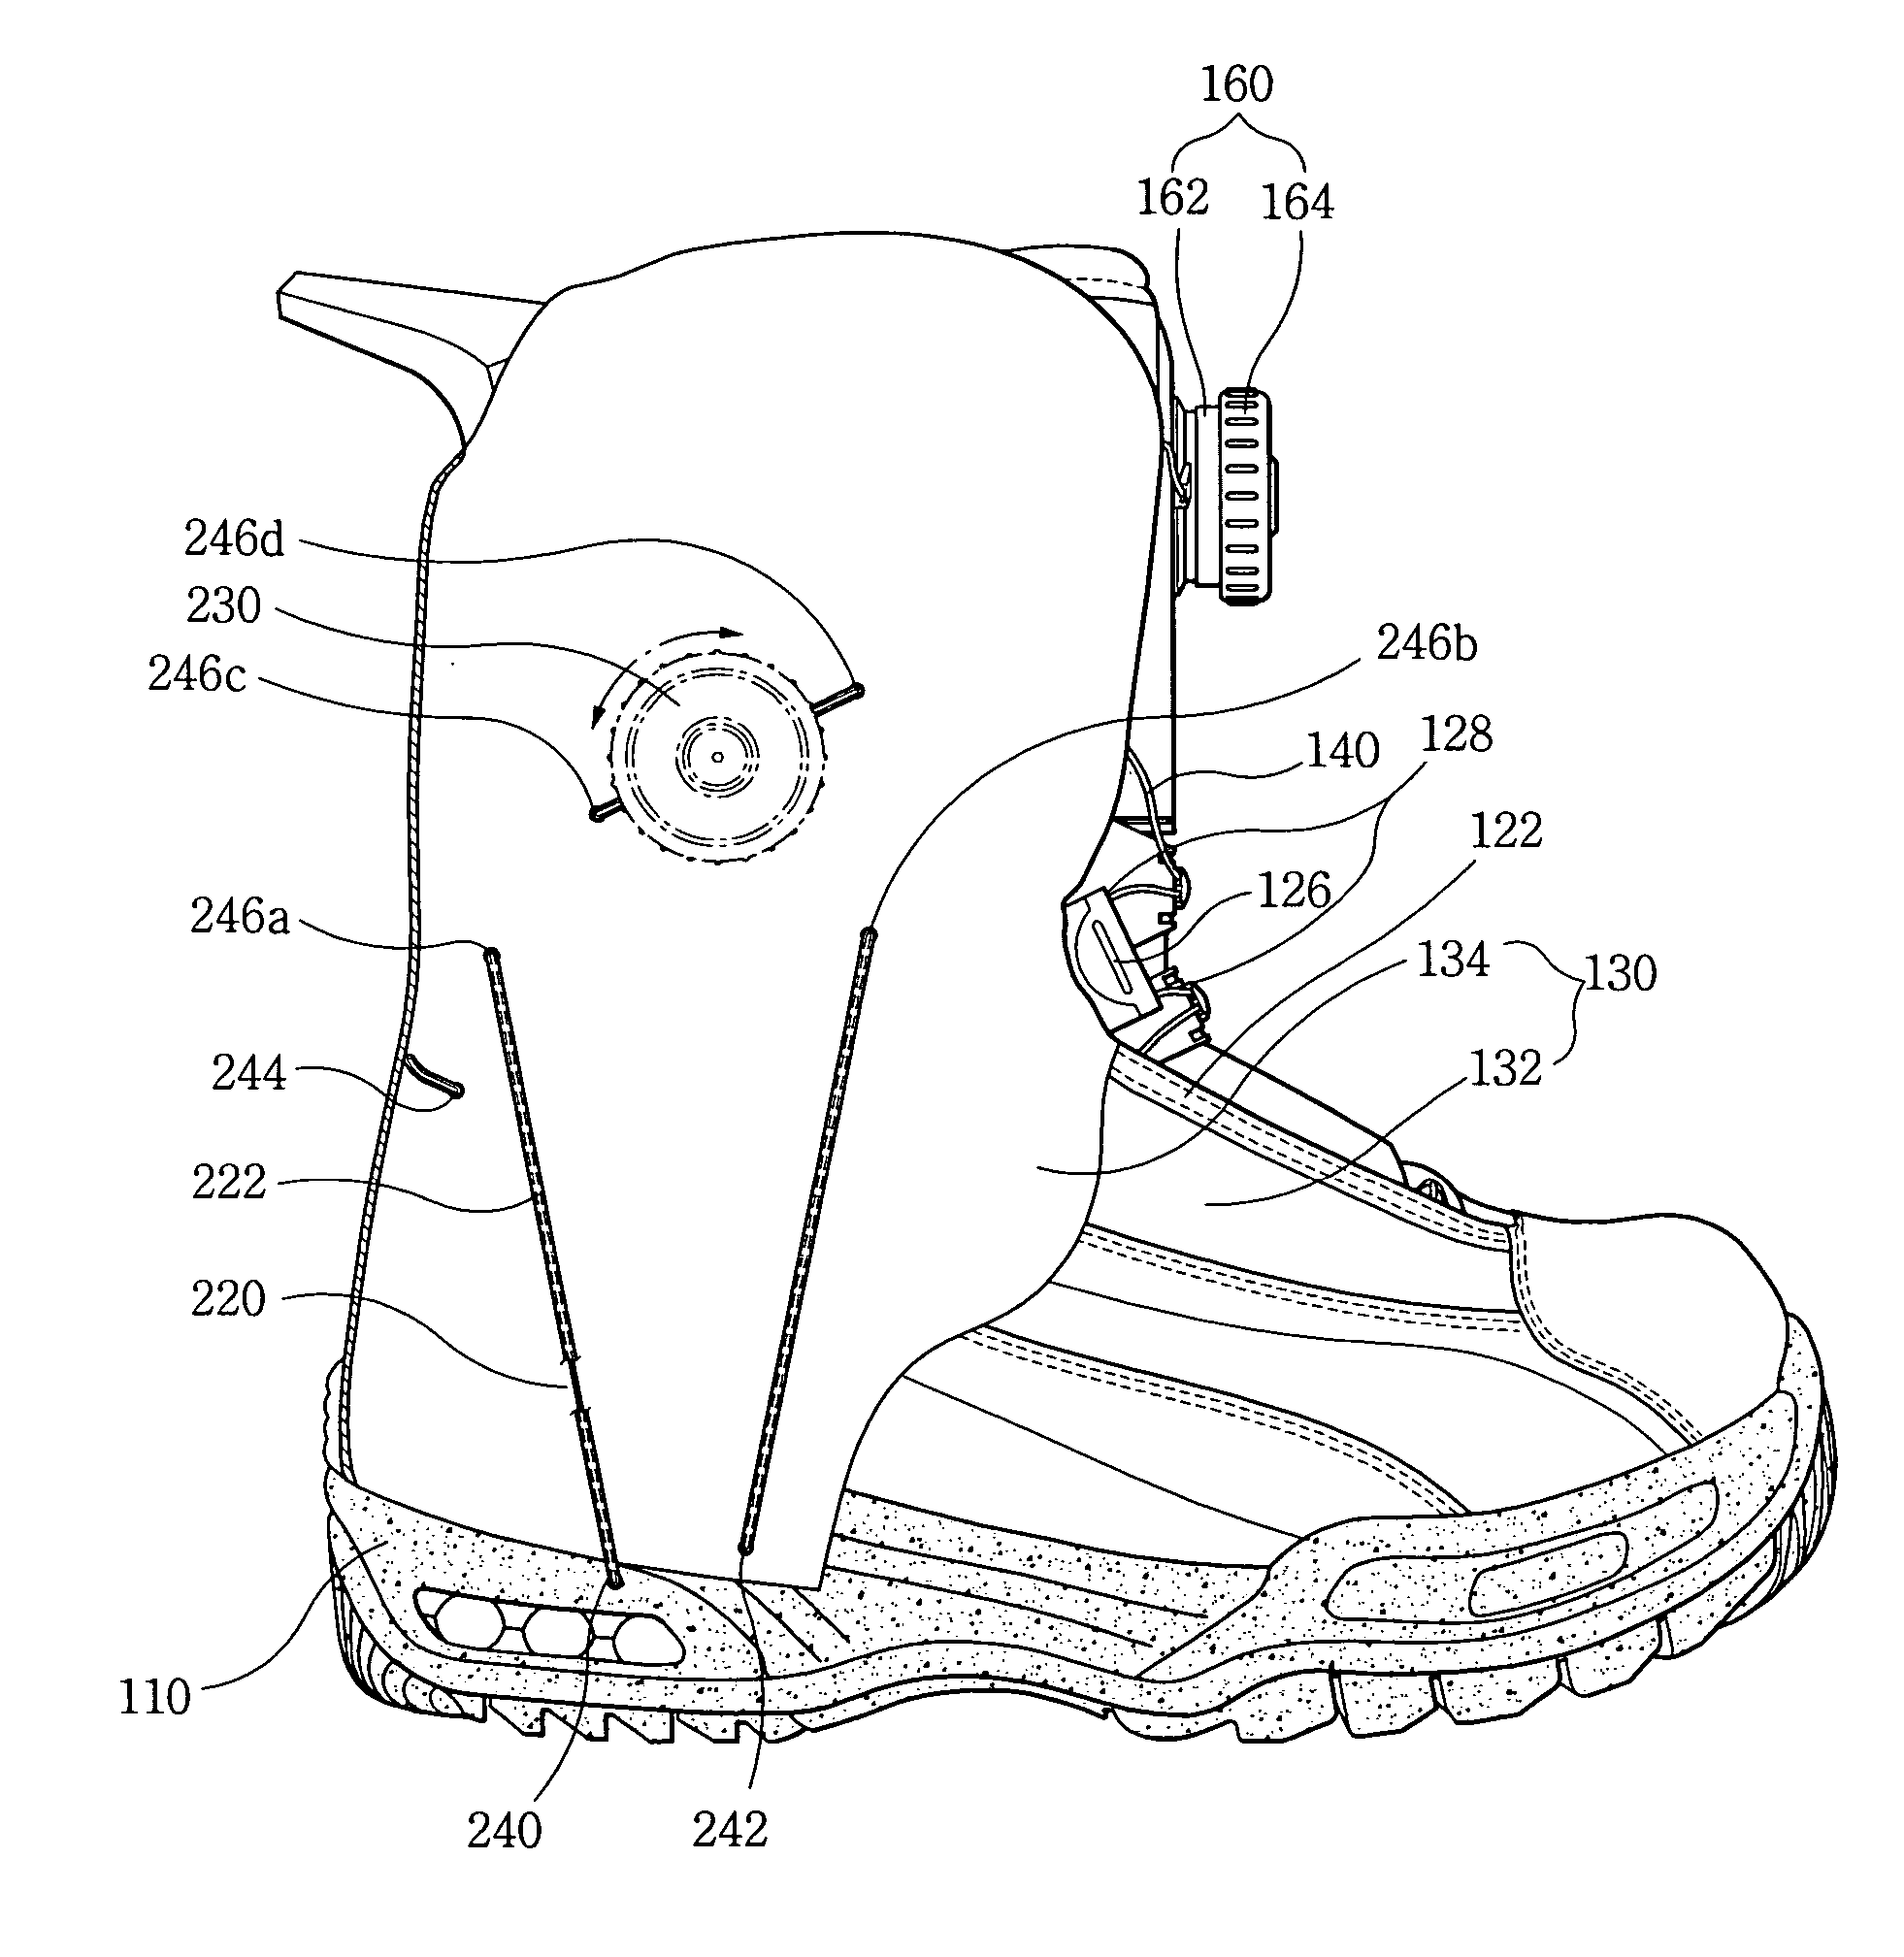 Apparatus for tightening top of foot in leisure sports boot fixing heel to sole